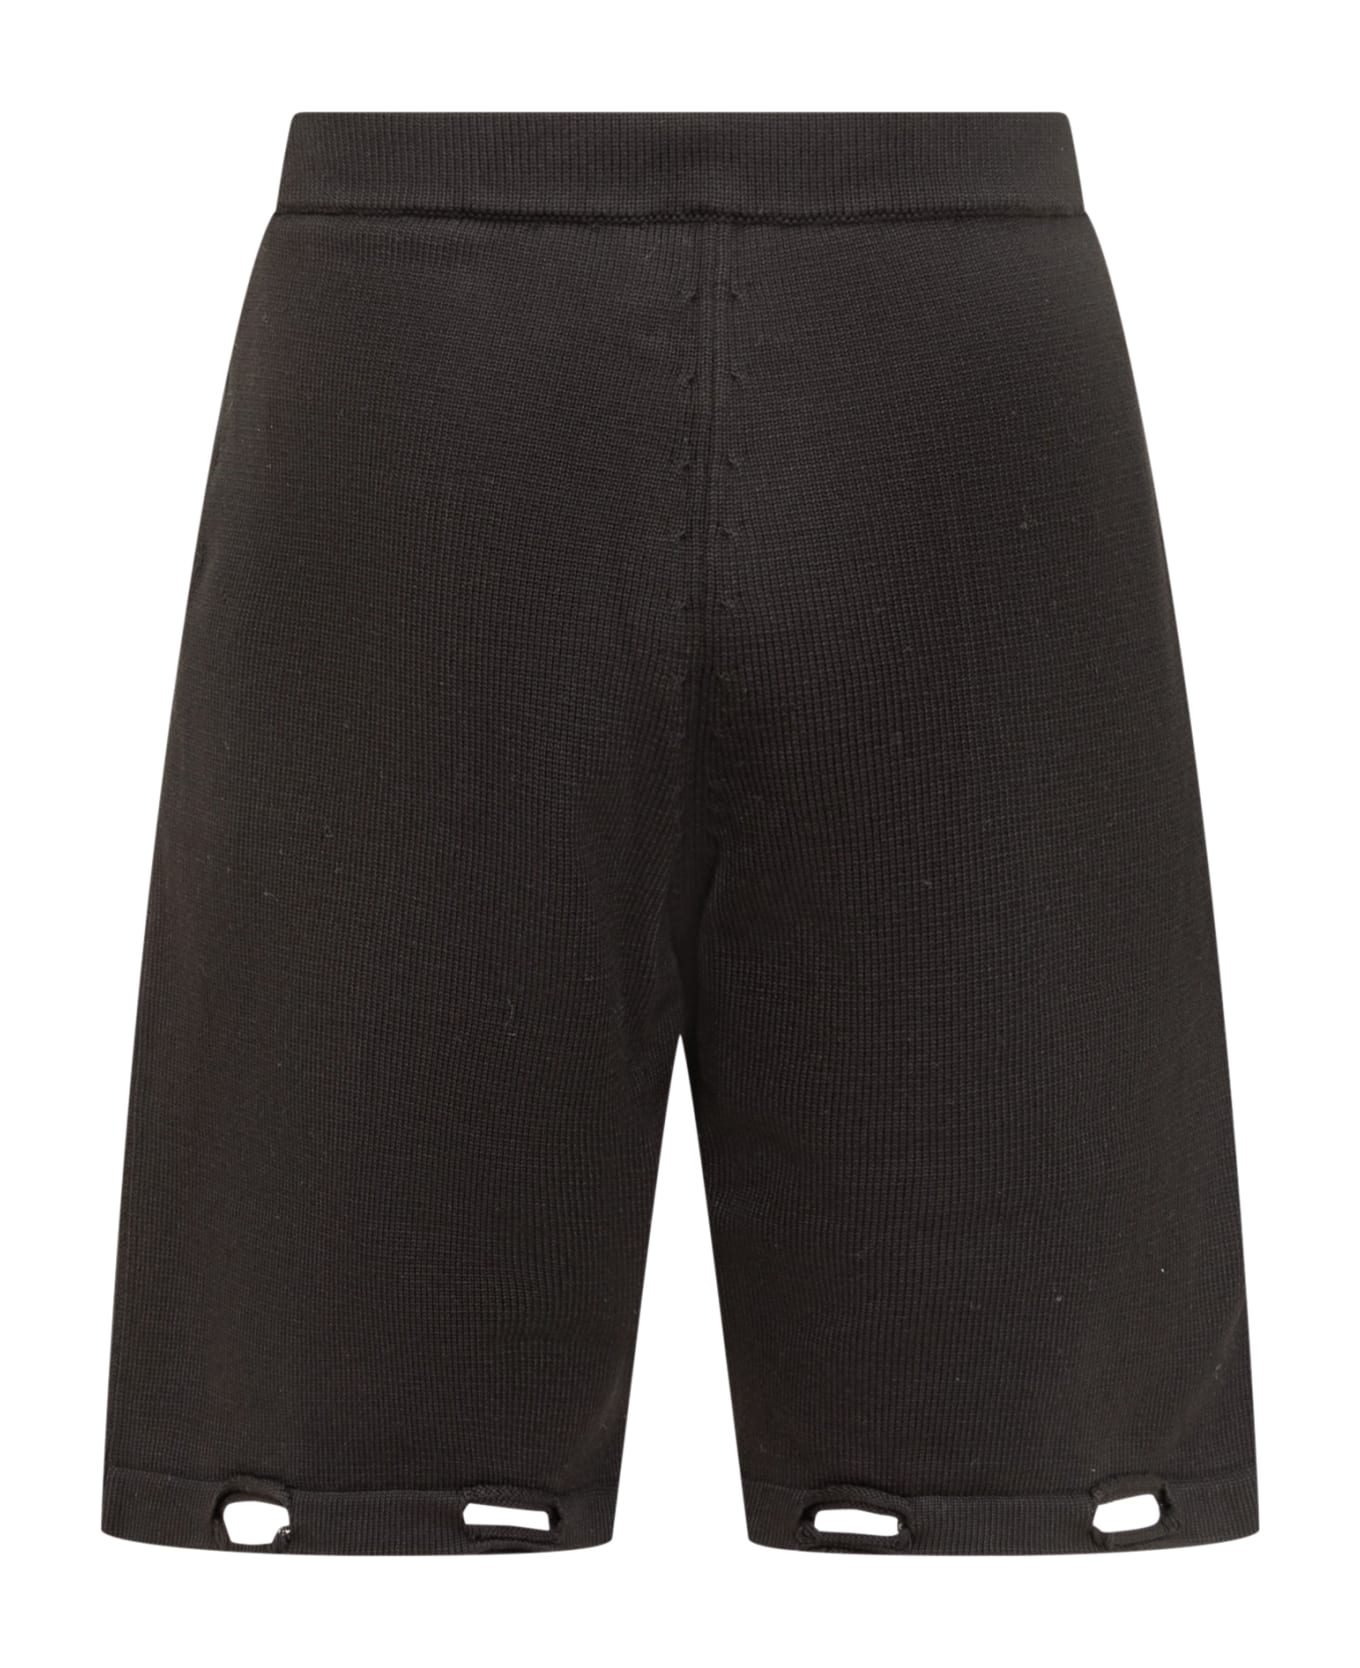 Givenchy Embroidered Knit Shorts - BLACK/WHITE ショートパンツ